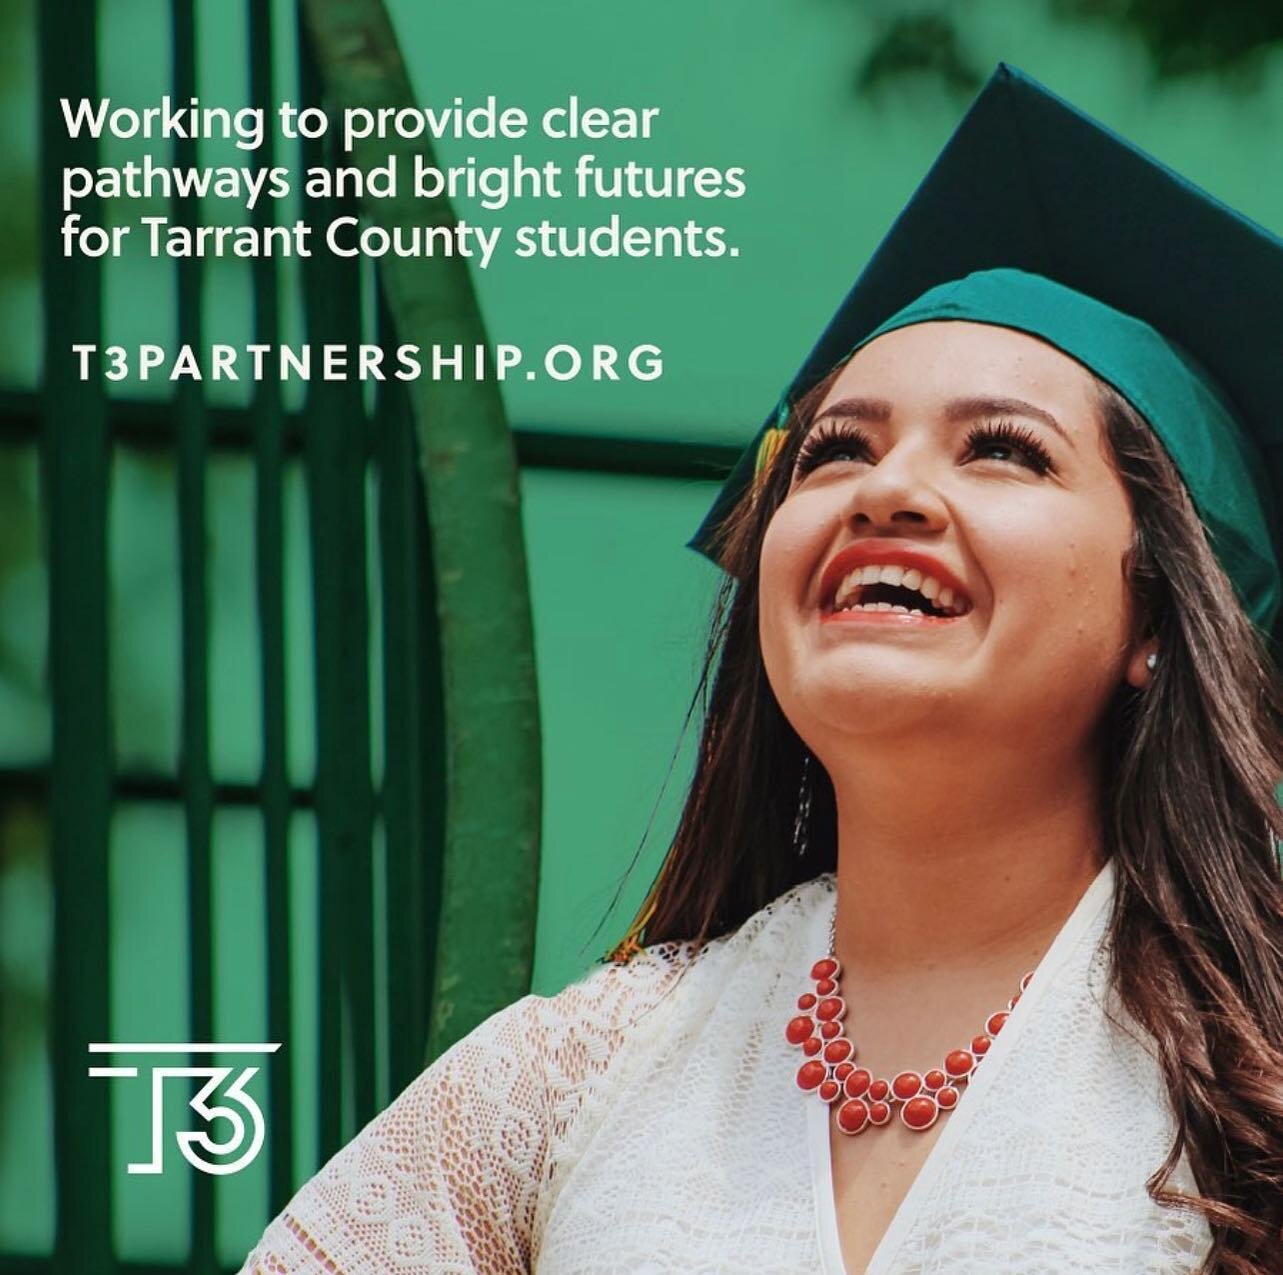 We&rsquo;re HIRING! 📣 If you or someone you know are passionate about helping students pursue (and complete) their postsecondary pathways, check out the @t3partnership and our open positions! 🎓

Have 1 new role joining our College &amp; Career Succ